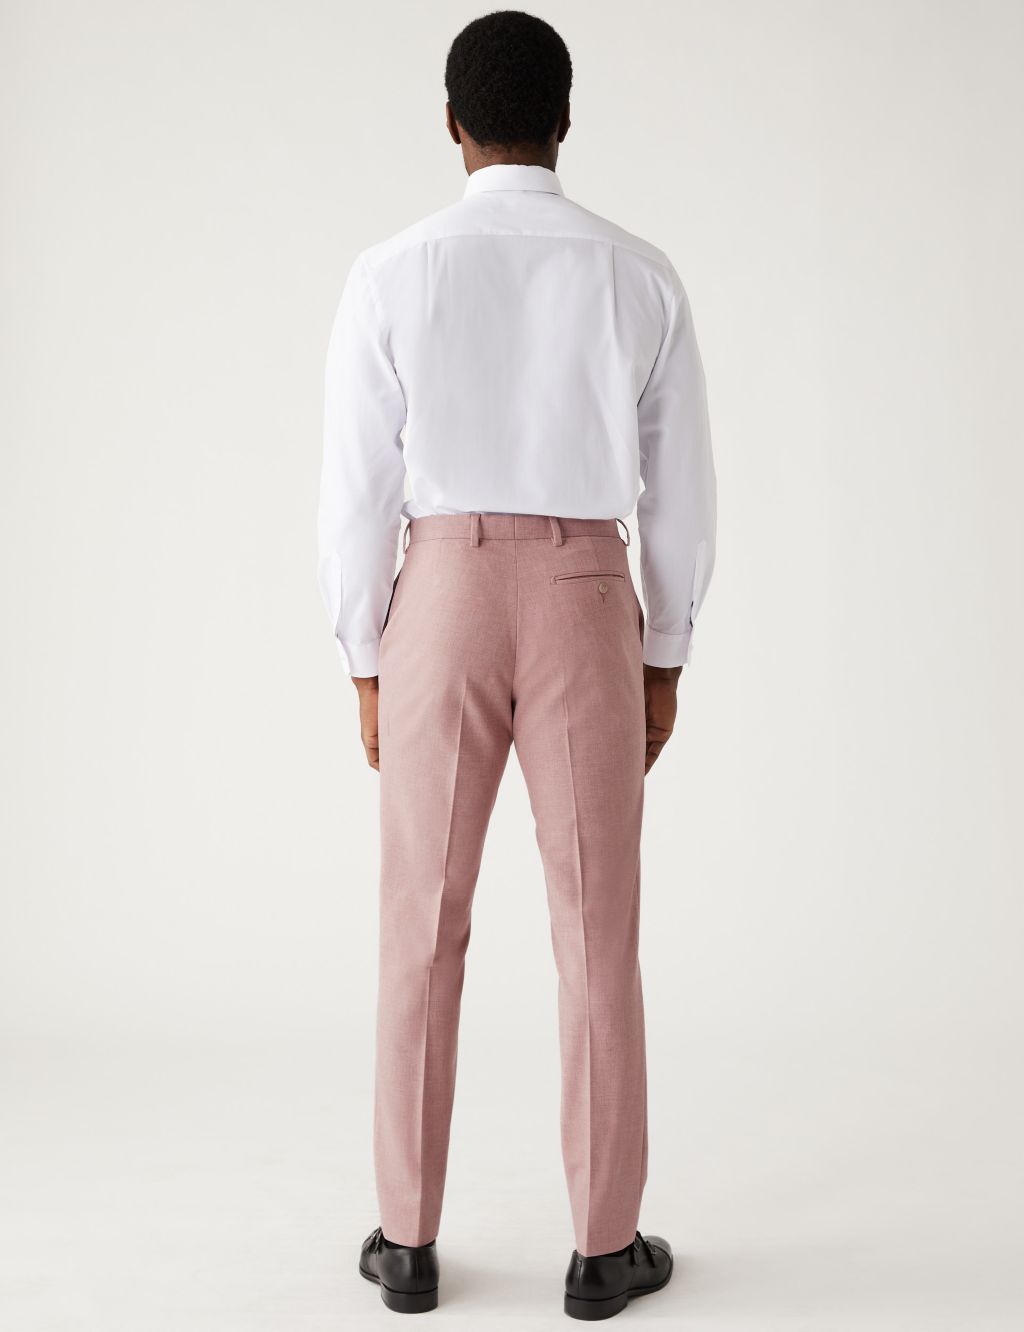 Slim Fit Marl Stretch Suit Trousers image 4